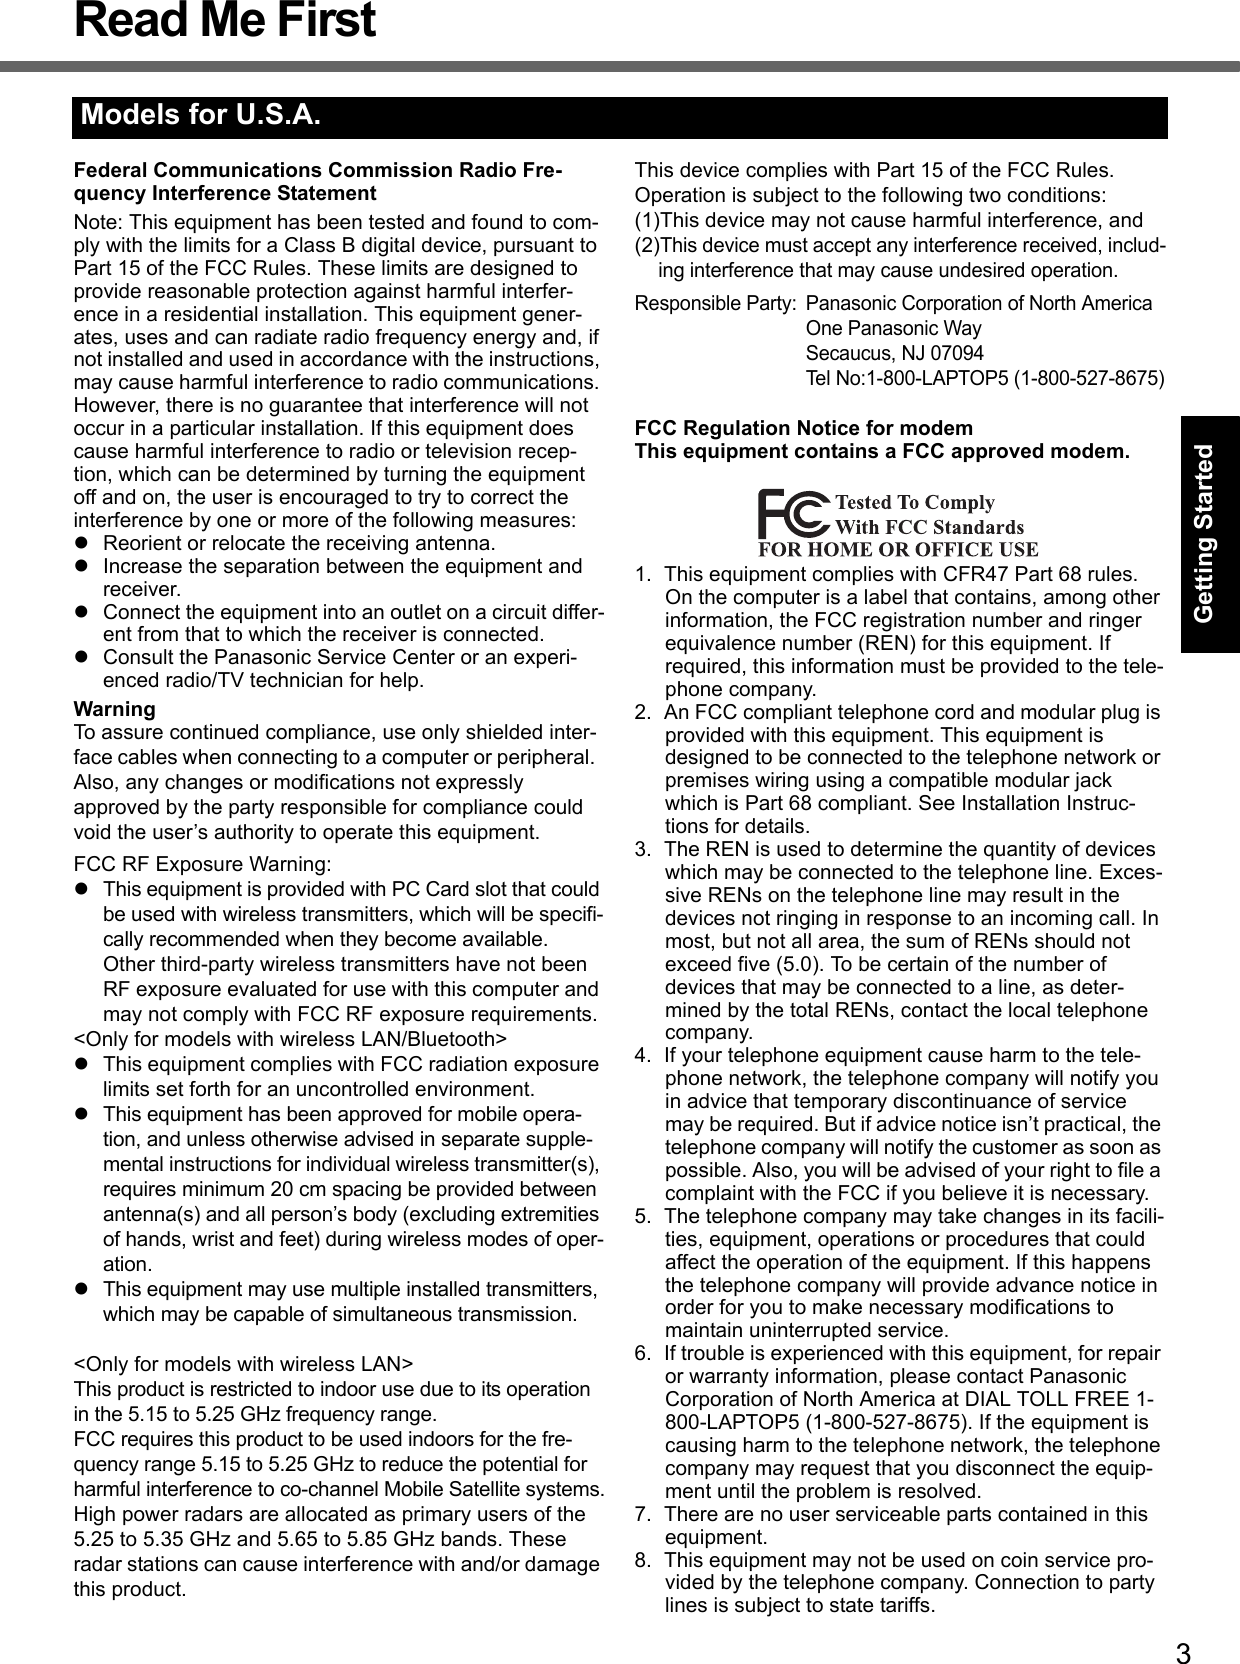 3Getting StartedUseful InformationTroubleshootingAppendixRead Me FirstFederal Communications Commission Radio Fre-quency Interference StatementNote: This equipment has been tested and found to com-ply with the limits for a Class B digital device, pursuant to Part 15 of the FCC Rules. These limits are designed to provide reasonable protection against harmful interfer-ence in a residential installation. This equipment gener-ates, uses and can radiate radio frequency energy and, if not installed and used in accordance with the instructions, may cause harmful interference to radio communications. However, there is no guarantee that interference will not occur in a particular installation. If this equipment does cause harmful interference to radio or television recep-tion, which can be determined by turning the equipment off and on, the user is encouraged to try to correct the interference by one or more of the following measures:zReorient or relocate the receiving antenna.zIncrease the separation between the equipment and receiver.zConnect the equipment into an outlet on a circuit differ-ent from that to which the receiver is connected.zConsult the Panasonic Service Center or an experi-enced radio/TV technician for help.WarningTo assure continued compliance, use only shielded inter-face cables when connecting to a computer or peripheral.  Also, any changes or modifications not expressly approved by the party responsible for compliance could void the user’s authority to operate this equipment.FCC RF Exposure Warning:zThis equipment is provided with PC Card slot that could be used with wireless transmitters, which will be specifi-cally recommended when they become available.Other third-party wireless transmitters have not been RF exposure evaluated for use with this computer and may not comply with FCC RF exposure requirements.&lt;Only for models with wireless LAN/Bluetooth&gt;zThis equipment complies with FCC radiation exposure limits set forth for an uncontrolled environment.zThis equipment has been approved for mobile opera-tion, and unless otherwise advised in separate supple-mental instructions for individual wireless transmitter(s), requires minimum 20 cm spacing be provided between antenna(s) and all person’s body (excluding extremities of hands, wrist and feet) during wireless modes of oper-ation.zThis equipment may use multiple installed transmitters, which may be capable of simultaneous transmission.&lt;Only for models with wireless LAN&gt;This product is restricted to indoor use due to its operation in the 5.15 to 5.25 GHz frequency range.FCC requires this product to be used indoors for the fre-quency range 5.15 to 5.25 GHz to reduce the potential for harmful interference to co-channel Mobile Satellite systems.High power radars are allocated as primary users of the 5.25 to 5.35 GHz and 5.65 to 5.85 GHz bands. These radar stations can cause interference with and/or damage this product.This device complies with Part 15 of the FCC Rules.  Operation is subject to the following two conditions:(1)This device may not cause harmful interference, and(2)This device must accept any interference received, includ-ing interference that may cause undesired operation.Responsible Party: Panasonic Corporation of North AmericaOne Panasonic WaySecaucus, NJ 07094Tel No:1-800-LAPTOP5 (1-800-527-8675)FCC Regulation Notice for modemThis equipment contains a FCC approved modem.1. This equipment complies with CFR47 Part 68 rules. On the computer is a label that contains, among other information, the FCC registration number and ringer equivalence number (REN) for this equipment. If required, this information must be provided to the tele-phone company.2. An FCC compliant telephone cord and modular plug is provided with this equipment. This equipment is designed to be connected to the telephone network or premises wiring using a compatible modular jack which is Part 68 compliant. See Installation Instruc-tions for details.3. The REN is used to determine the quantity of devices which may be connected to the telephone line. Exces-sive RENs on the telephone line may result in the devices not ringing in response to an incoming call. In most, but not all area, the sum of RENs should not exceed five (5.0). To be certain of the number of devices that may be connected to a line, as deter-mined by the total RENs, contact the local telephone company.4. If your telephone equipment cause harm to the tele-phone network, the telephone company will notify you in advice that temporary discontinuance of service may be required. But if advice notice isn’t practical, the telephone company will notify the customer as soon as possible. Also, you will be advised of your right to file a complaint with the FCC if you believe it is necessary.5. The telephone company may take changes in its facili-ties, equipment, operations or procedures that could affect the operation of the equipment. If this happens the telephone company will provide advance notice in order for you to make necessary modifications to maintain uninterrupted service.6. If trouble is experienced with this equipment, for repair or warranty information, please contact Panasonic Corporation of North America at DIAL TOLL FREE 1-800-LAPTOP5 (1-800-527-8675). If the equipment is causing harm to the telephone network, the telephone company may request that you disconnect the equip-ment until the problem is resolved.7. There are no user serviceable parts contained in this equipment.8. This equipment may not be used on coin service pro-vided by the telephone company. Connection to party lines is subject to state tariffs.Models for U.S.A.